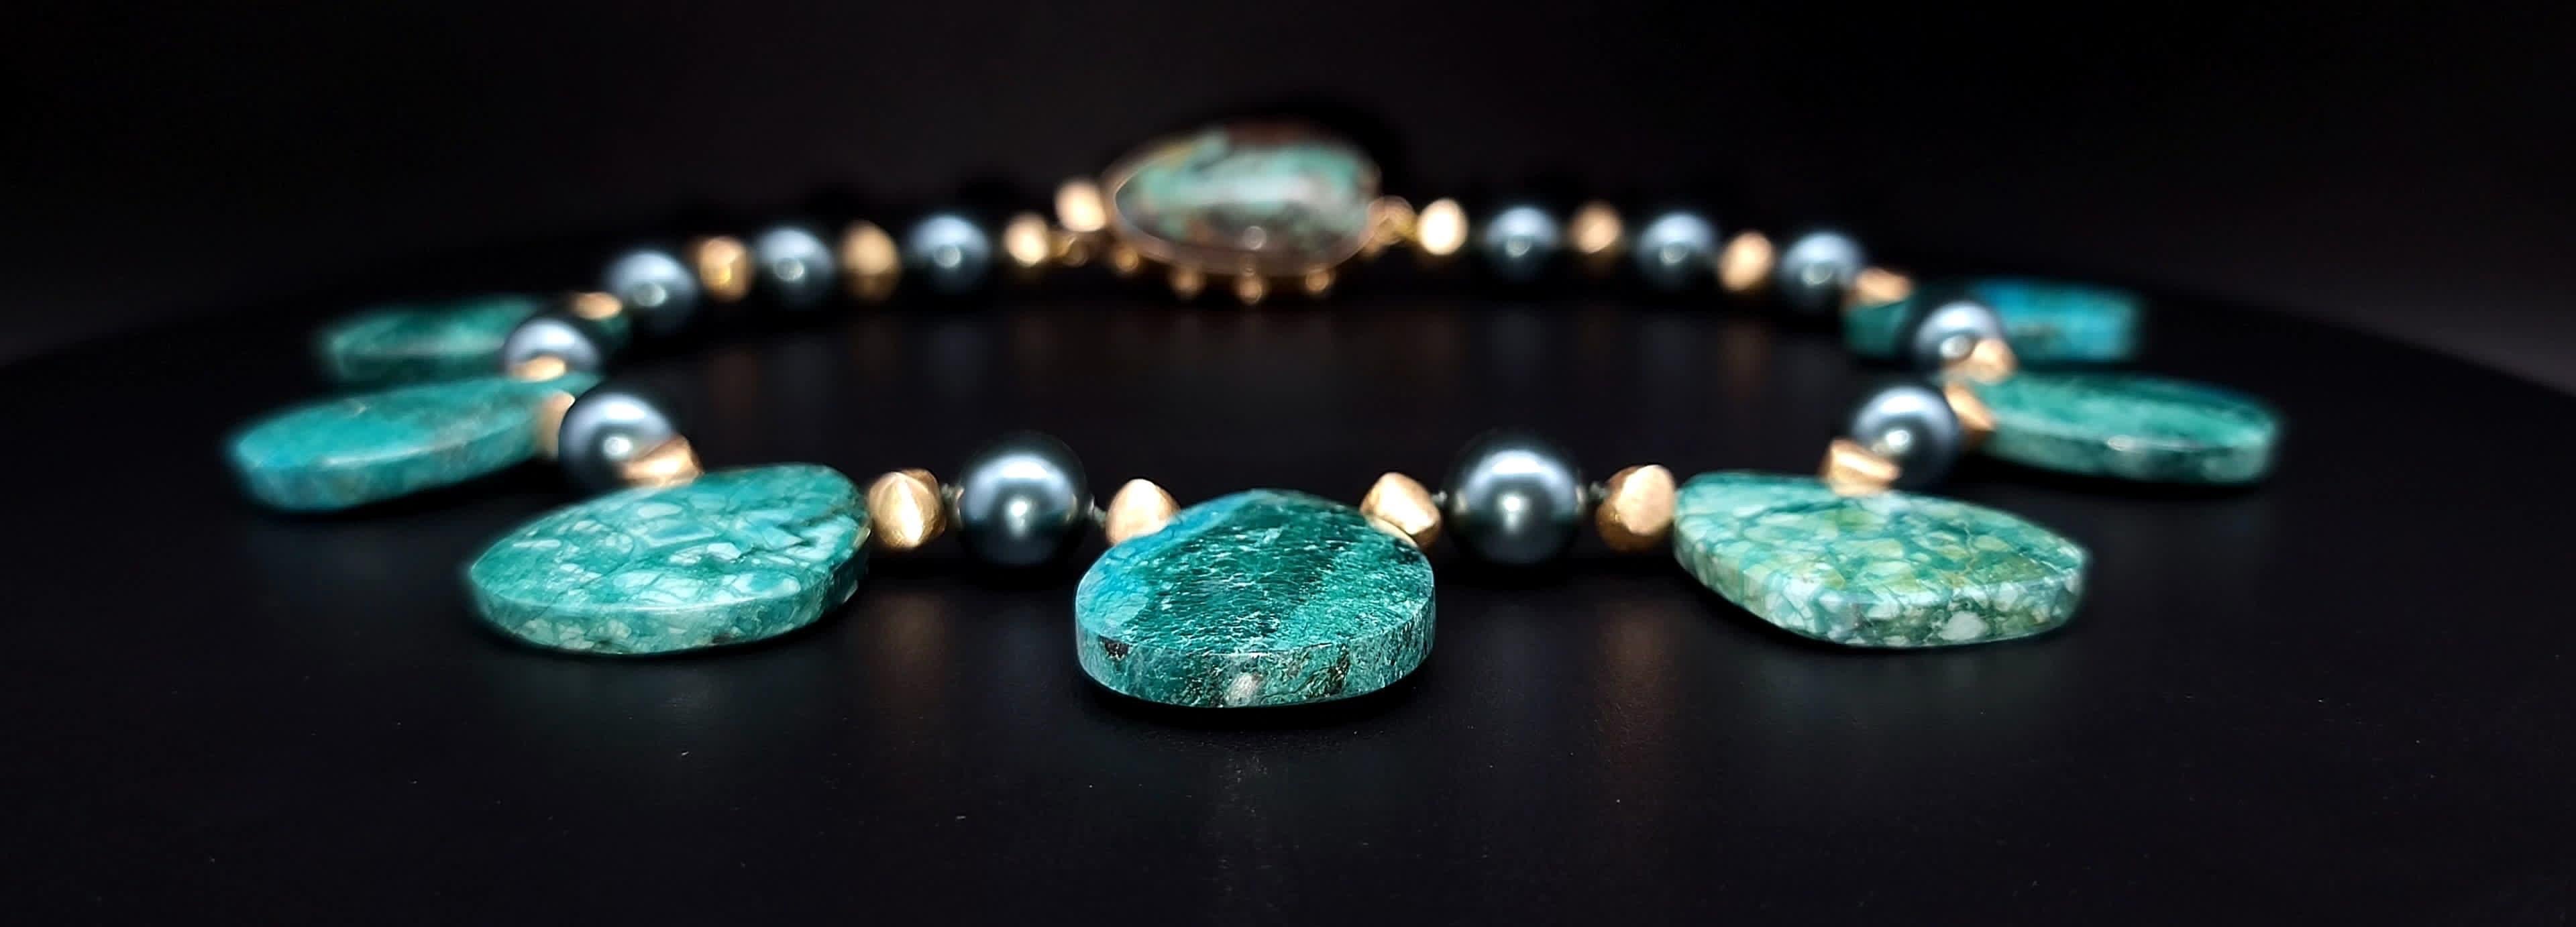 A.Jeschel Masterpiece Oval Chrysocolla plates necklace For Sale 2